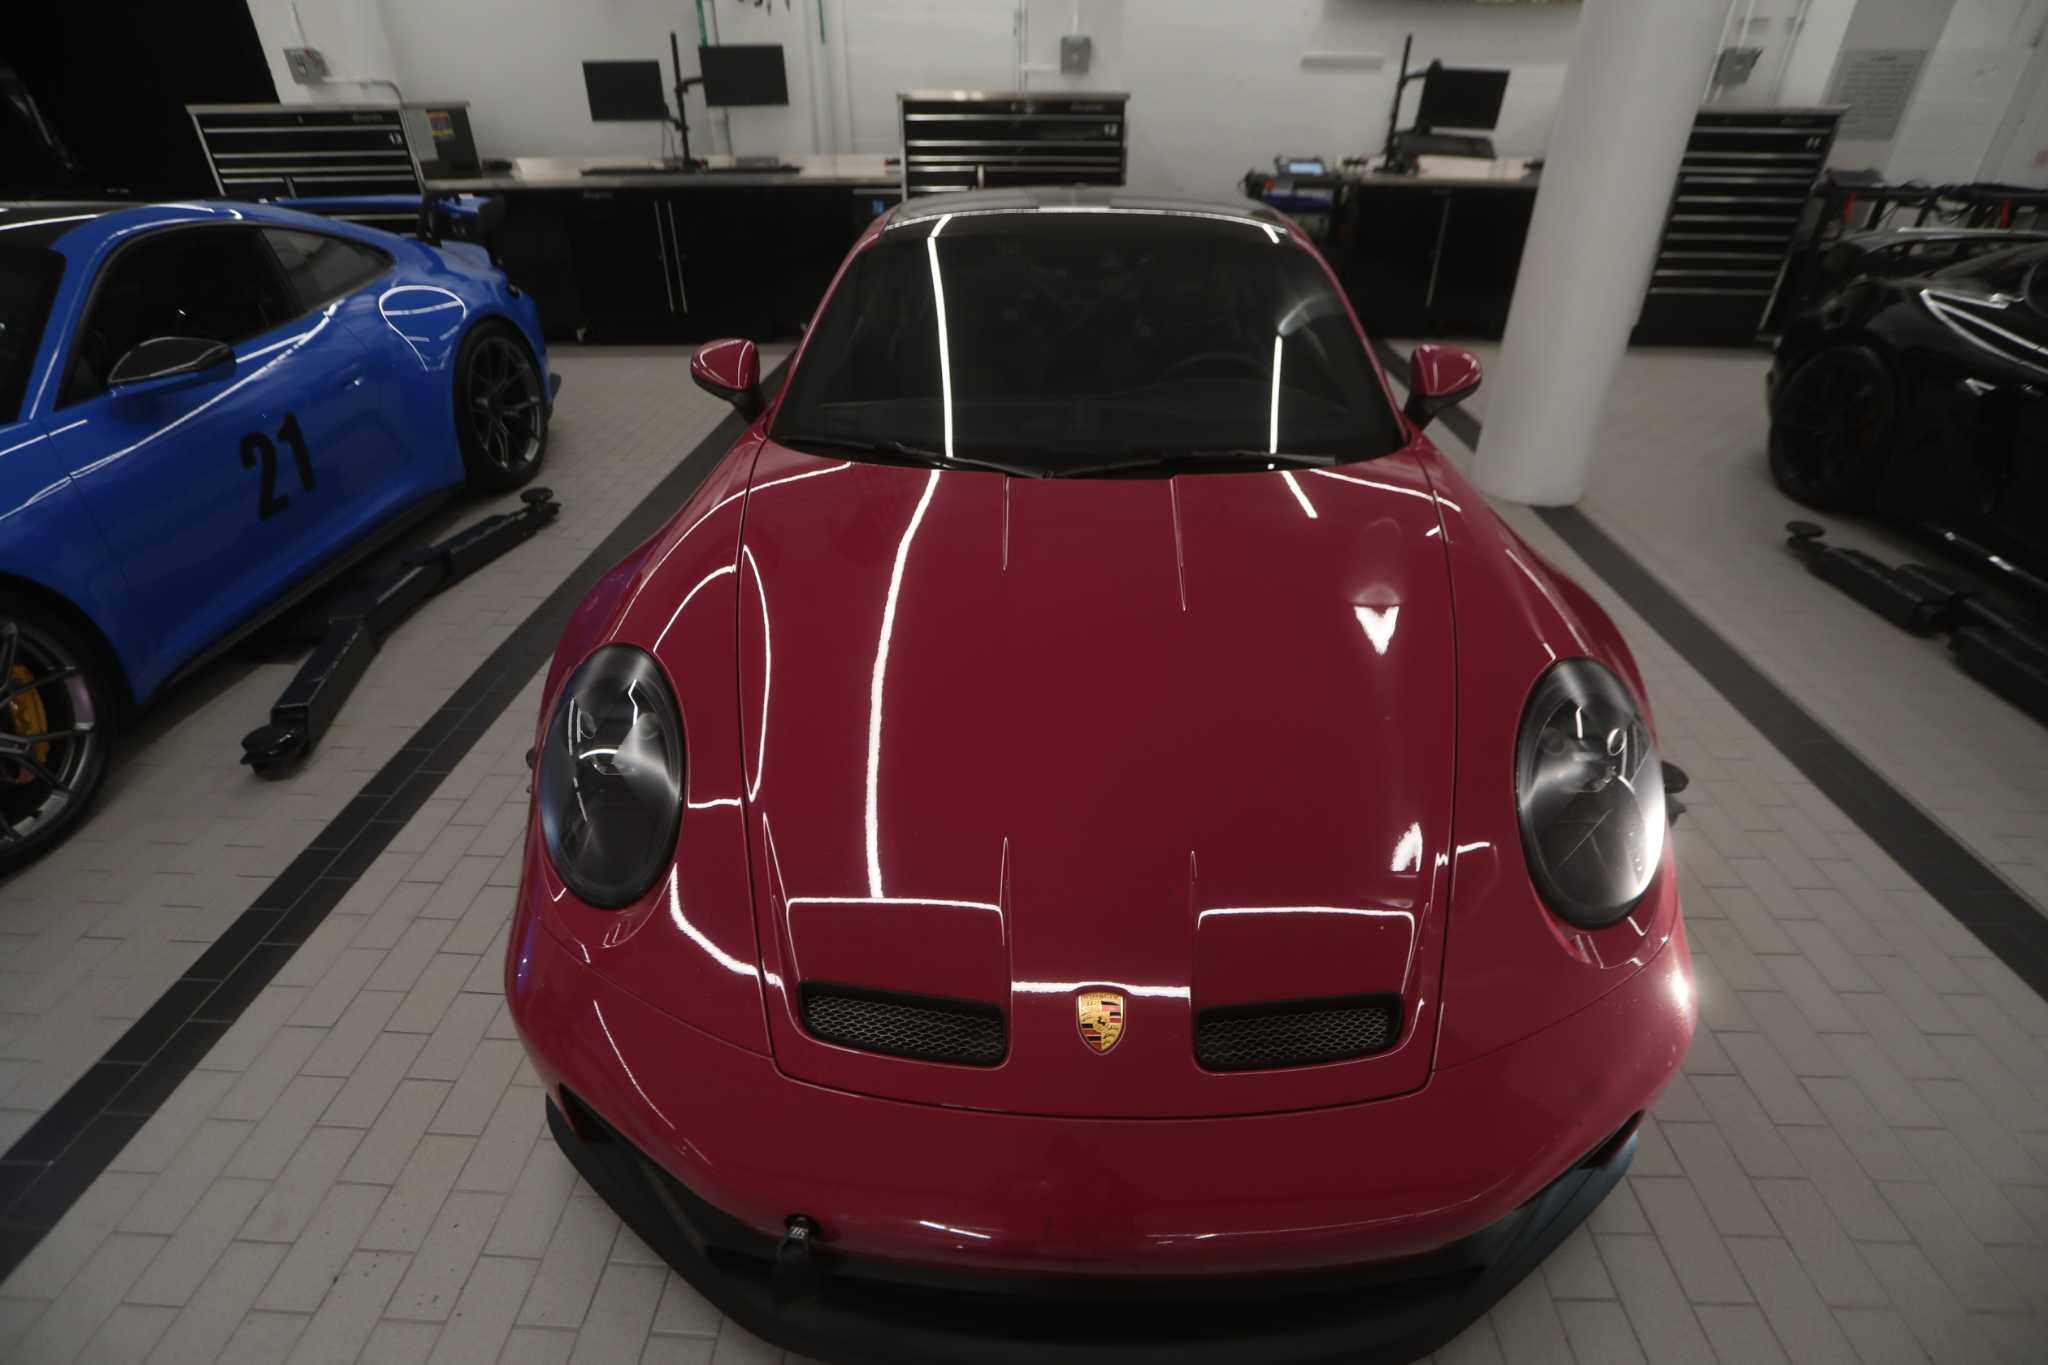 S.F. gets first Porsche dealership and $10 million investment in SoMa